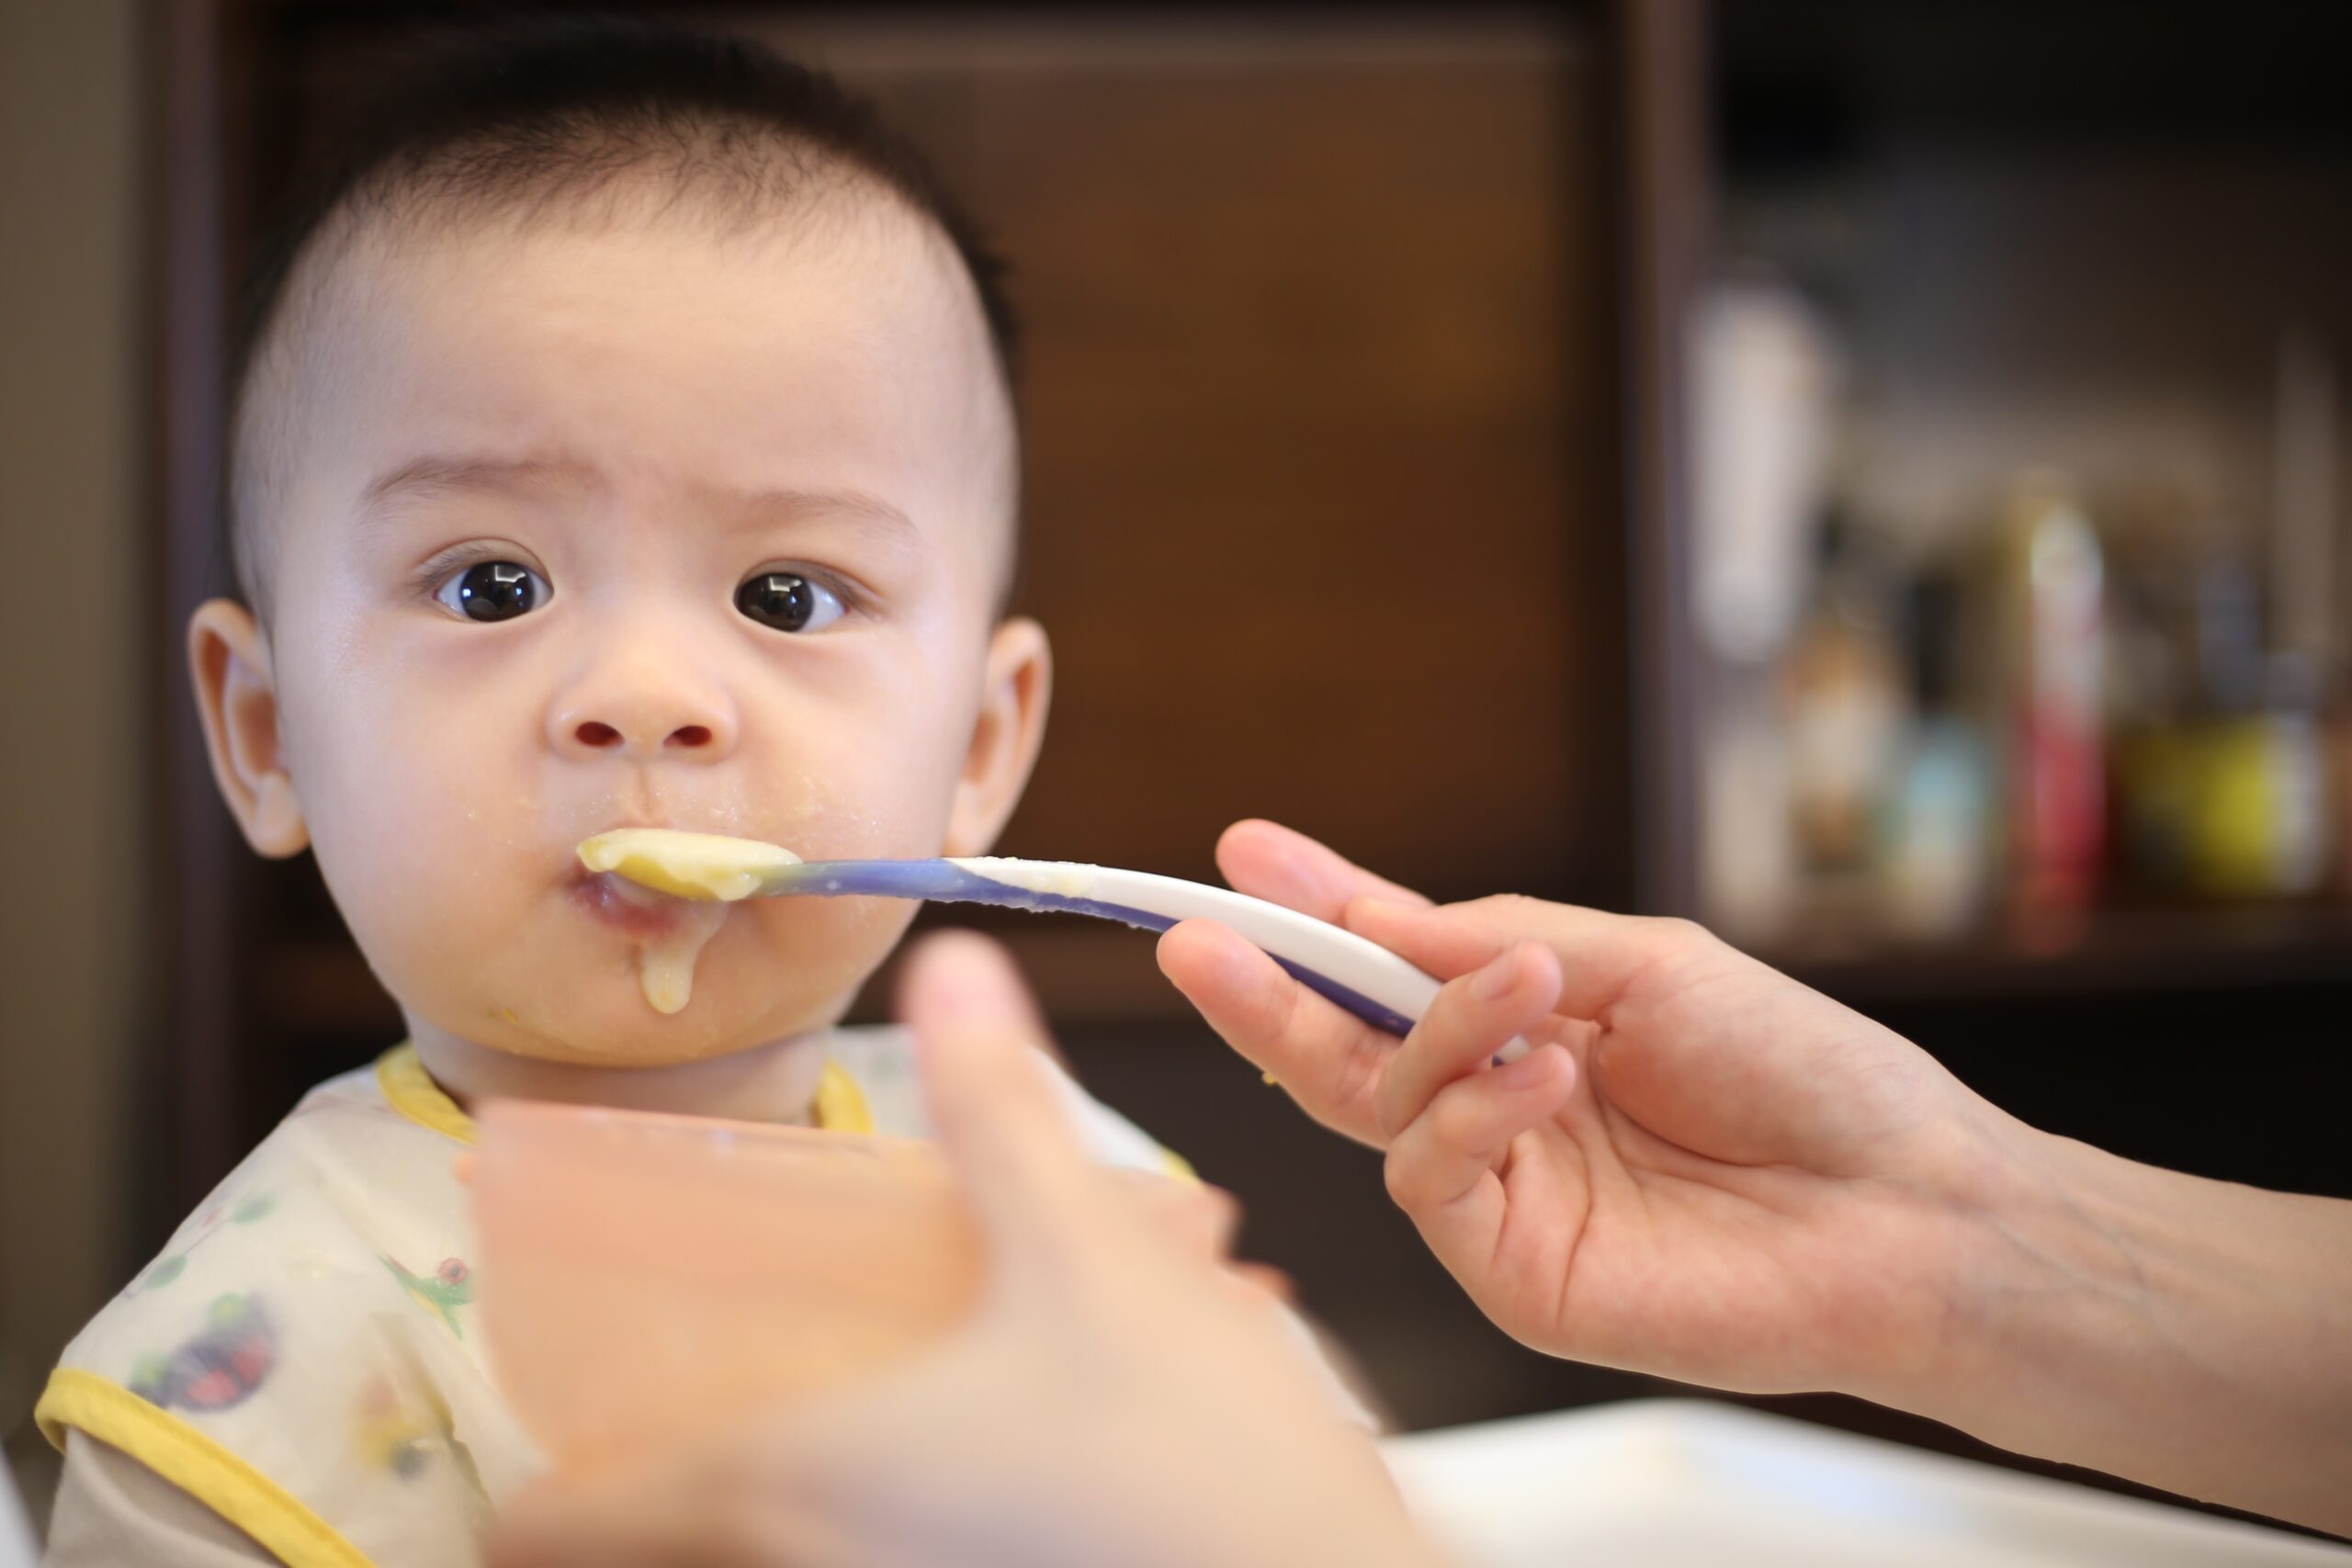 Baby being fed food from a spoon.